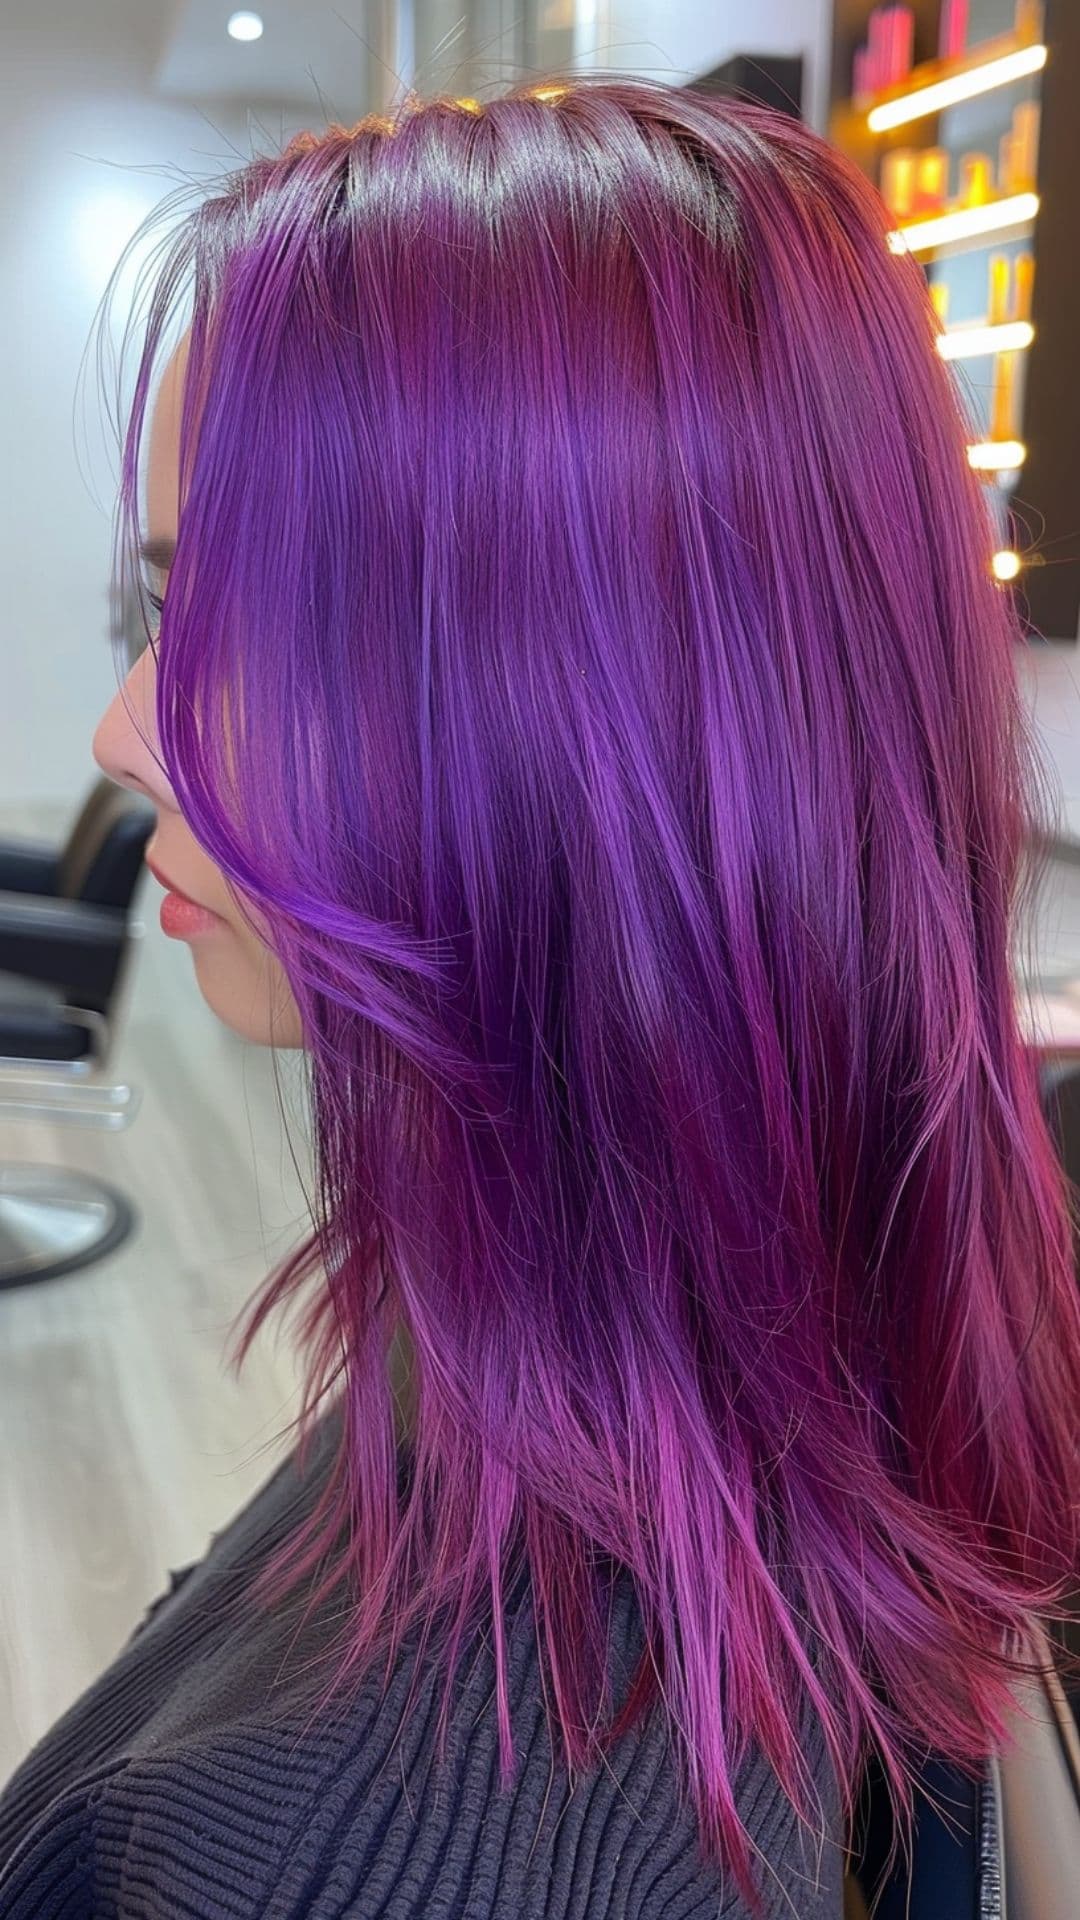 A woman modelling a purple and pink hair.